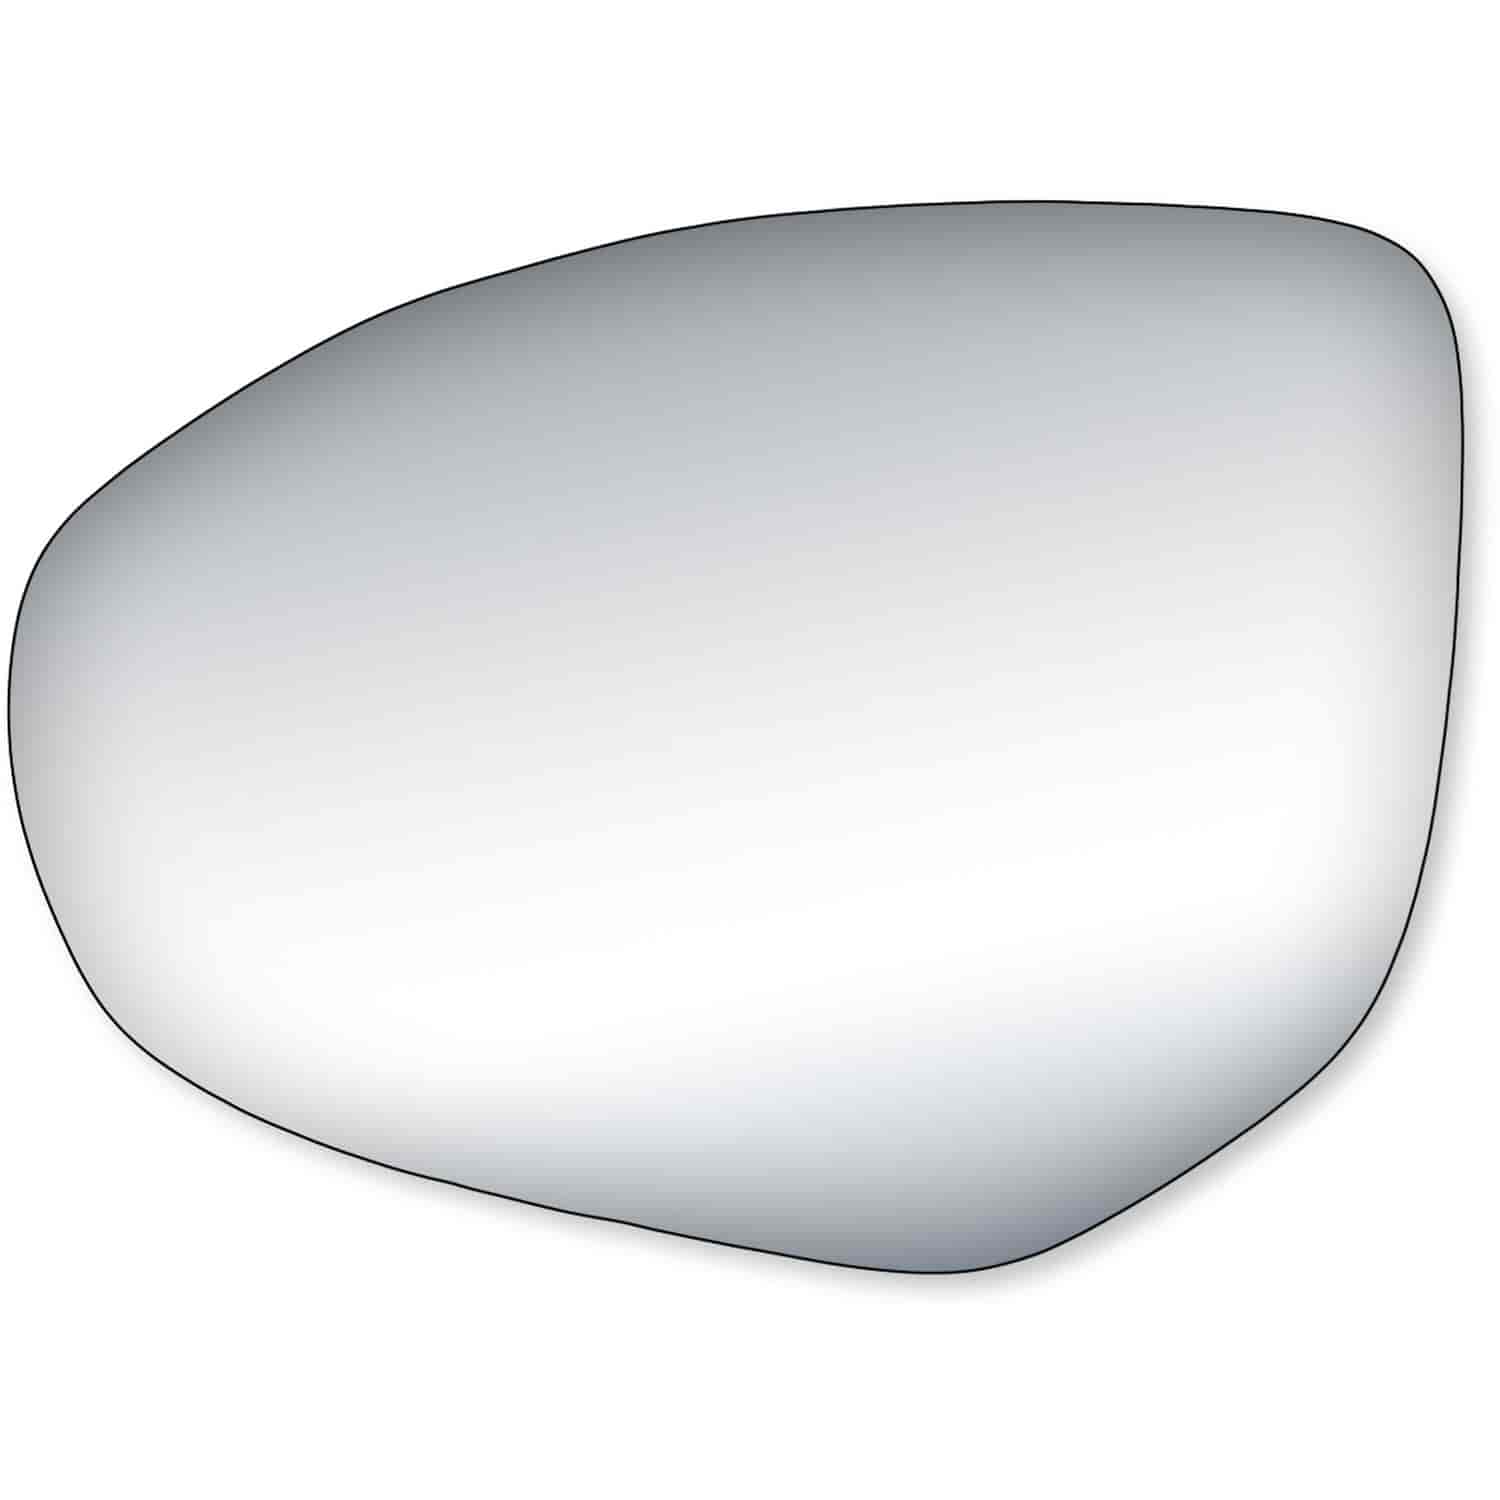 Replacement Glass for 11-14 Mazda 2 w/out blind spot lens ; 10-13 Mazda 3 w/out blind spot lens the